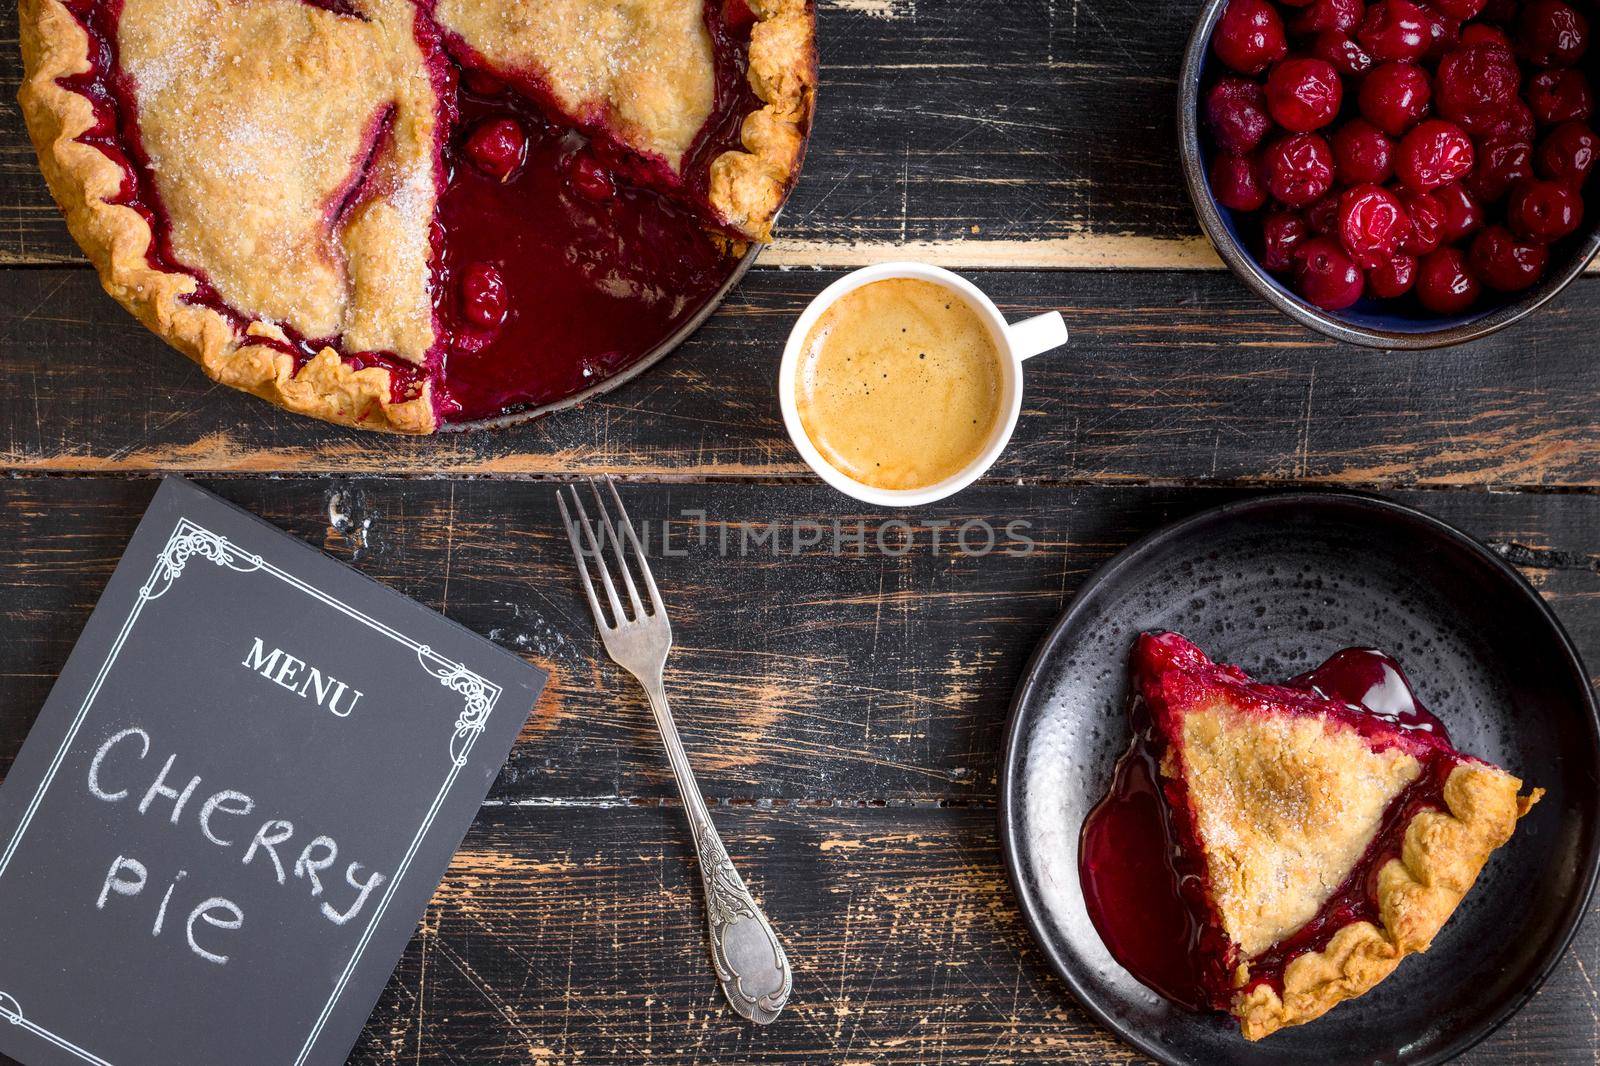 Homemade sliced cherry pie with flaky crust, cup of coffee, bowl with cherries and menu chalkboard on the black wooden table. Top view